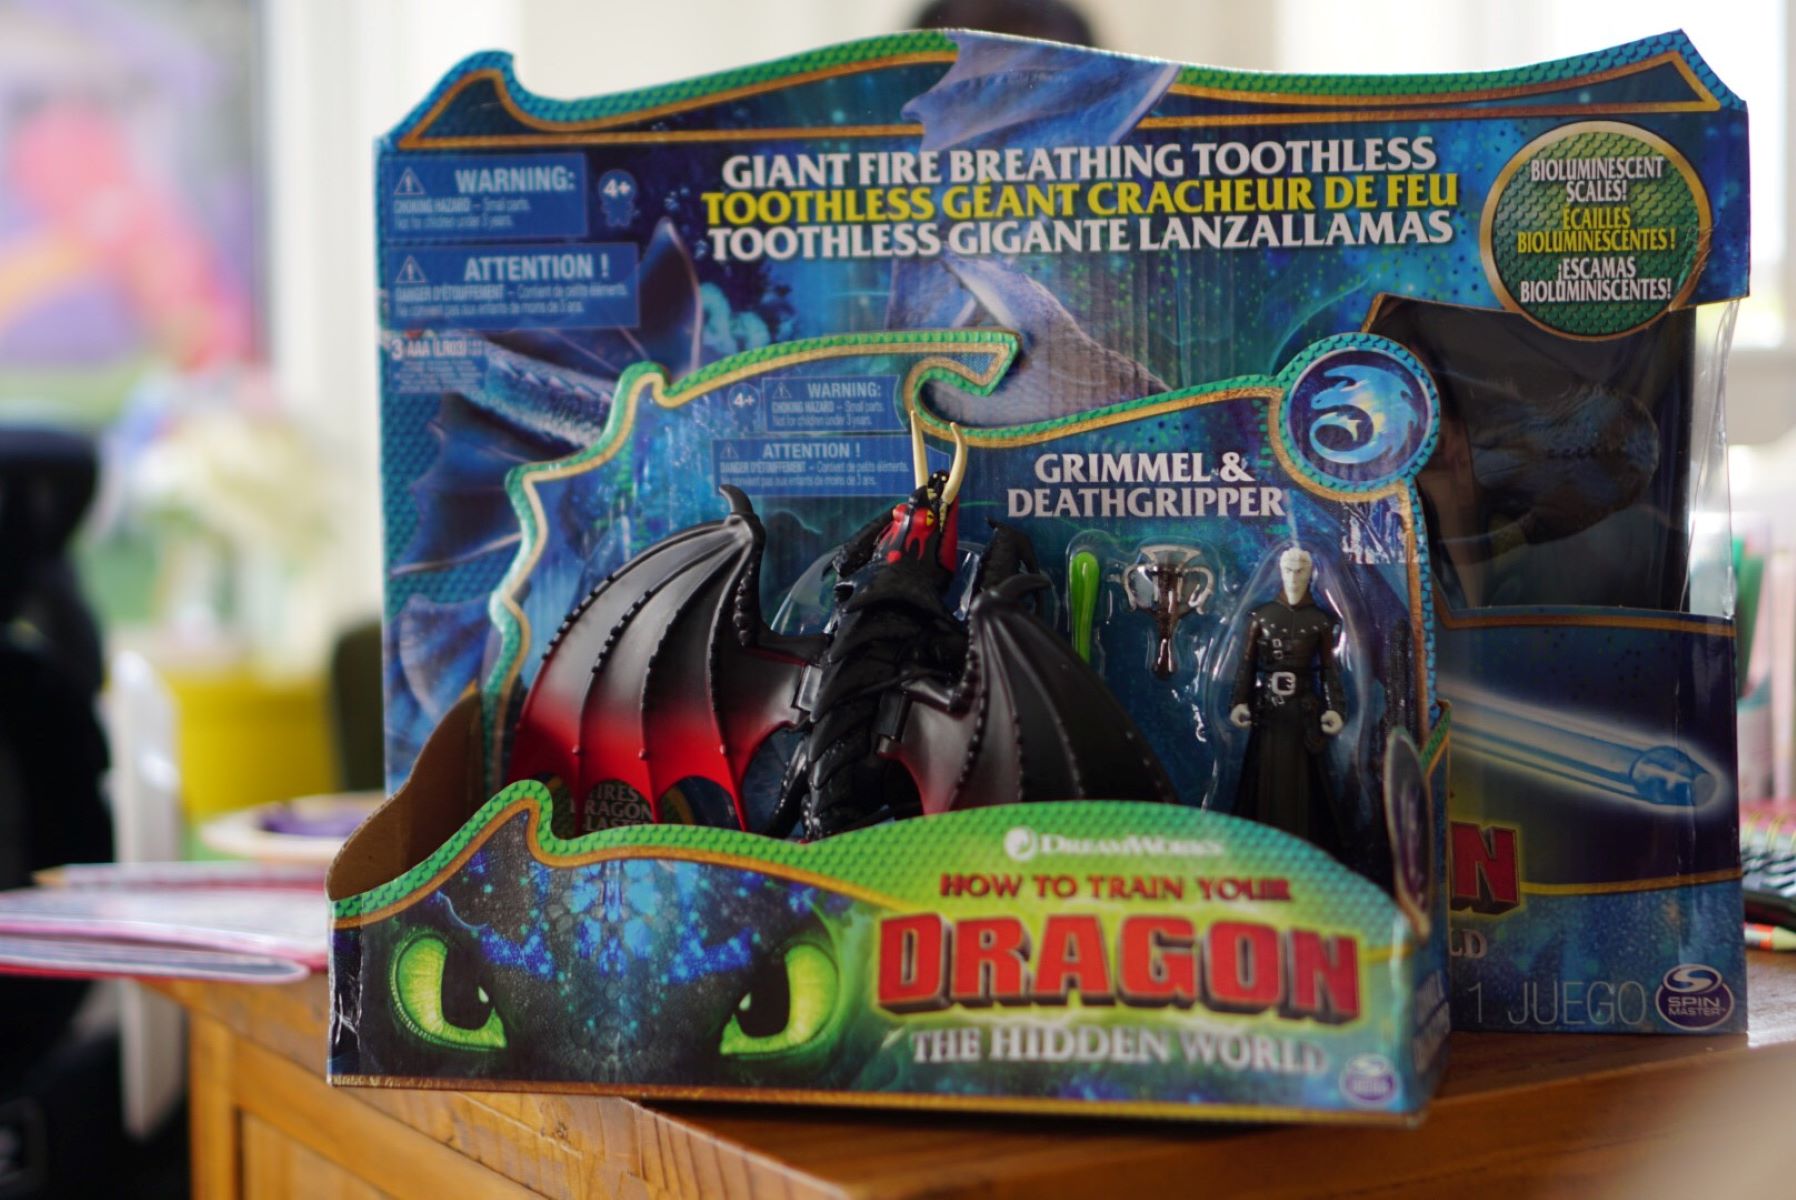 The Shocking Truth Behind The Exorbitant Prices Of How To Train Your Dragon Toys